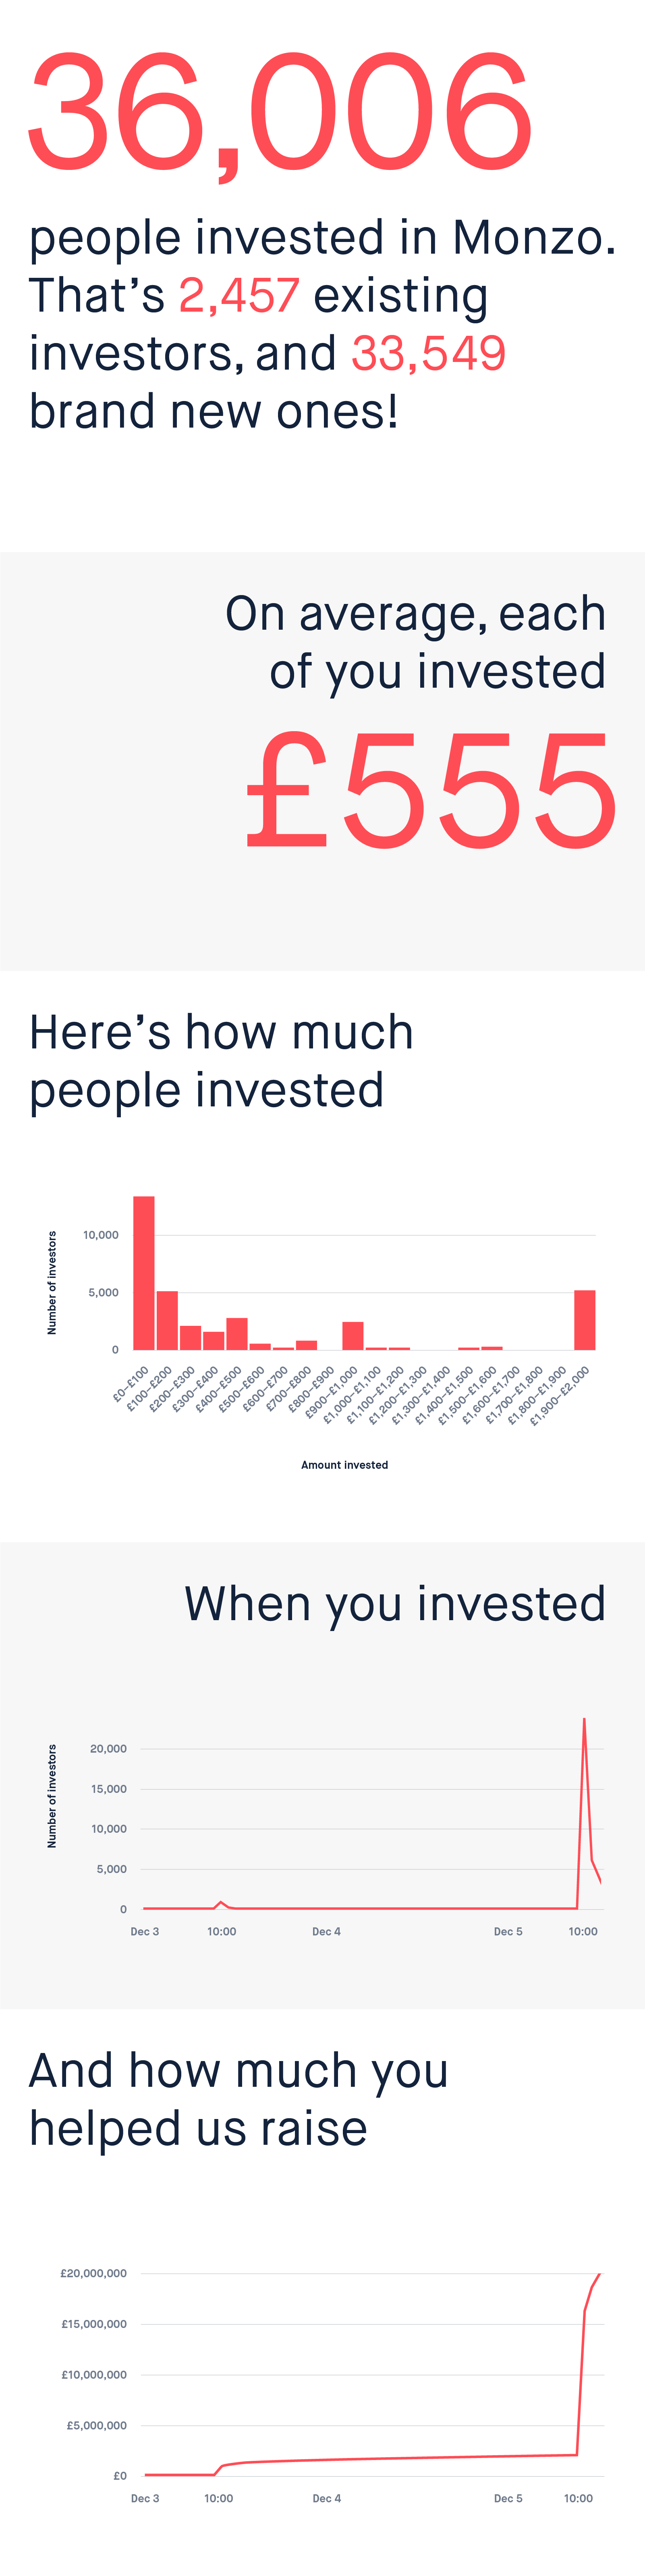 36,006 people invested in Monzo. That's 2,457 existing investors, and 33,549 brand new ones!
          On average, each of you invested £555.